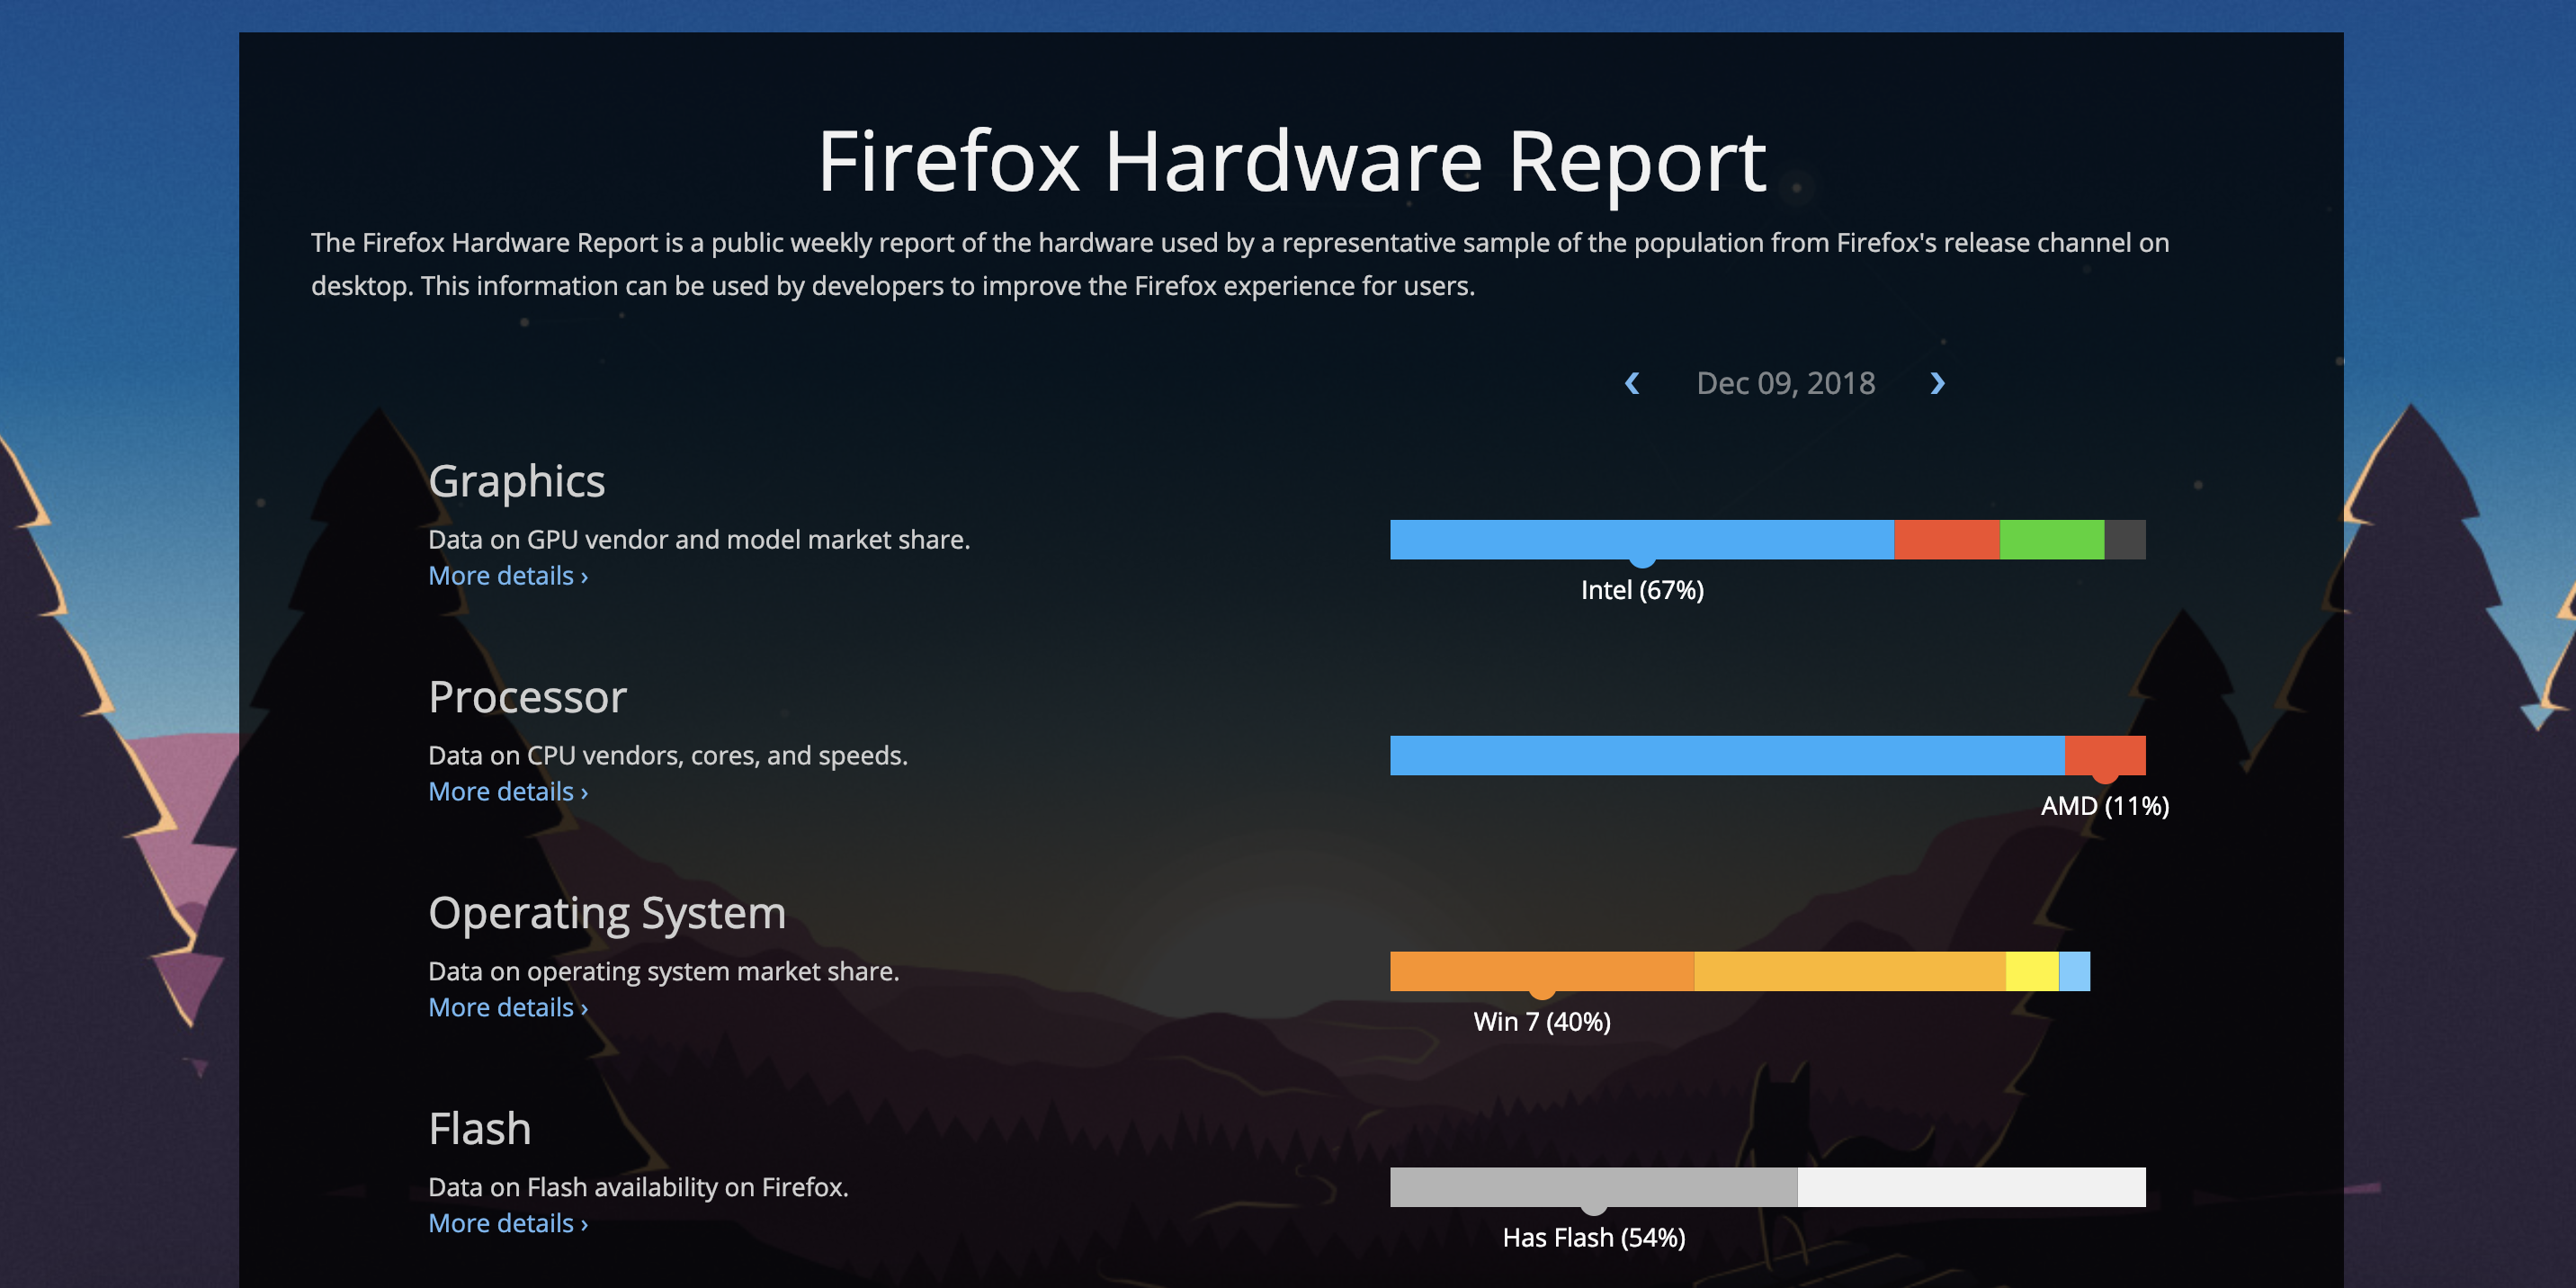 The Firefox Hardware Report